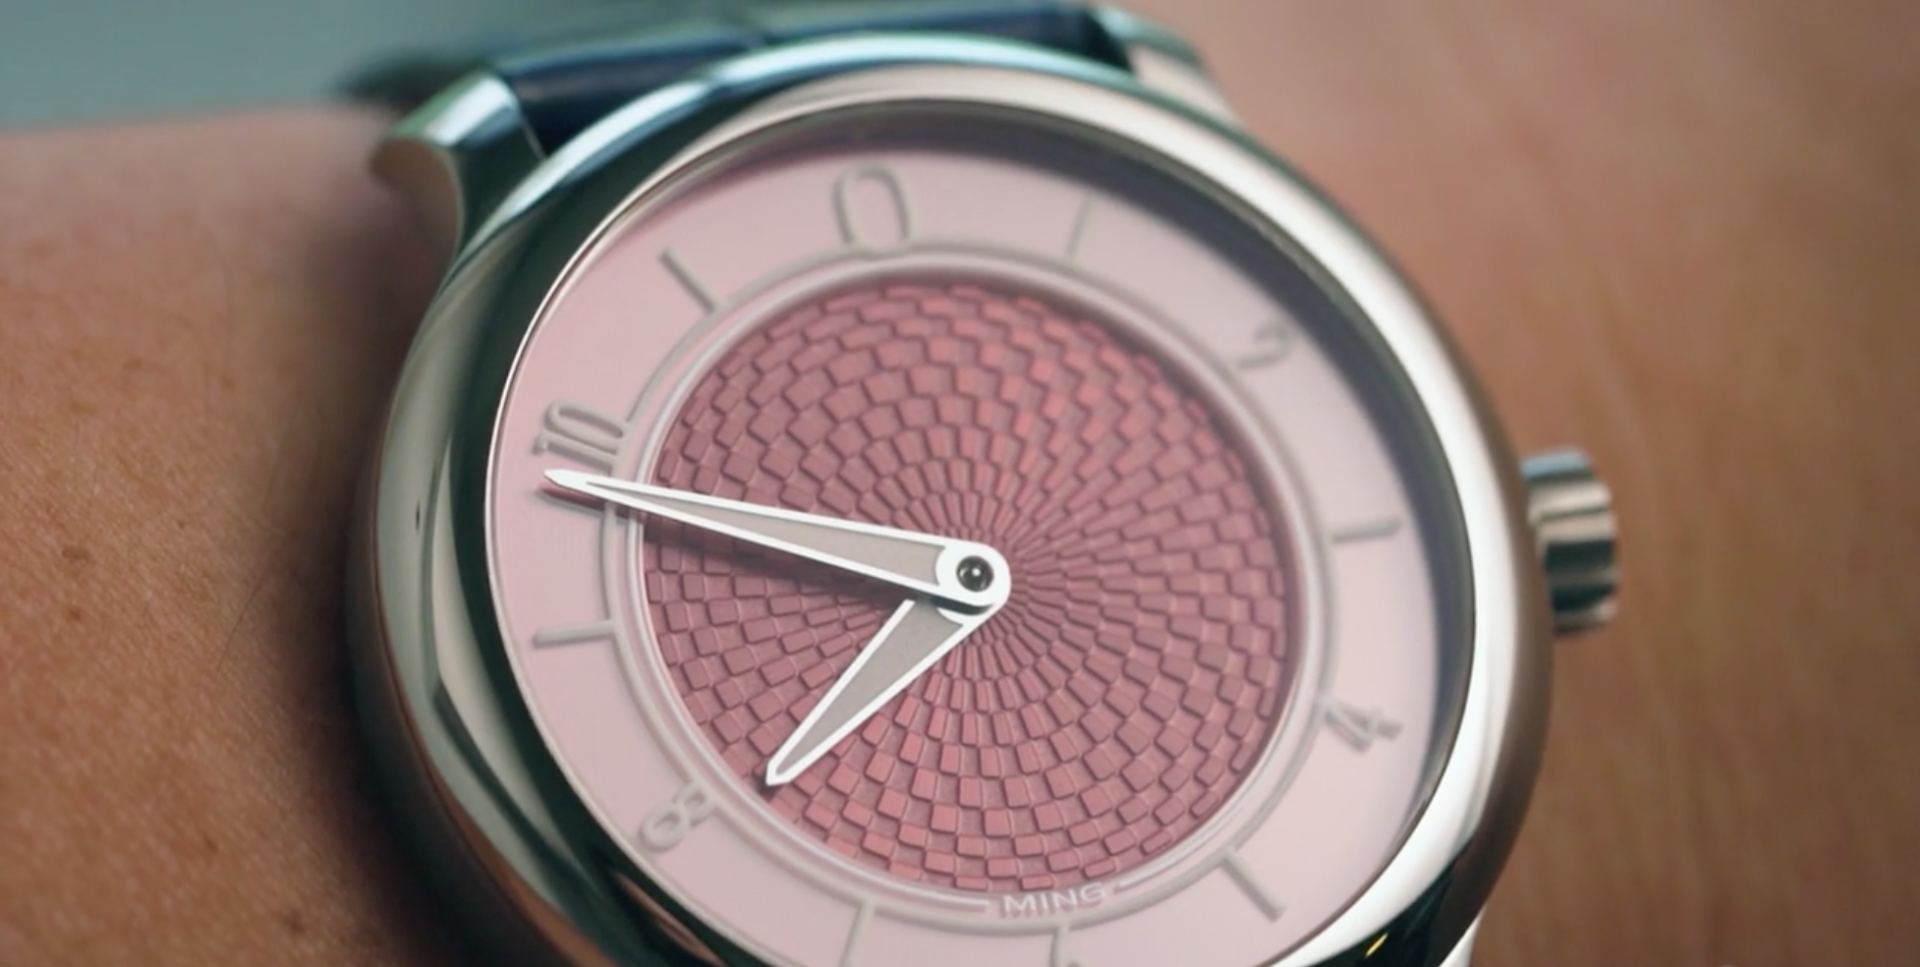 EVERY WATCH TELLS A STORY: John is blown away by the dial of his Ming 17.06 Copper